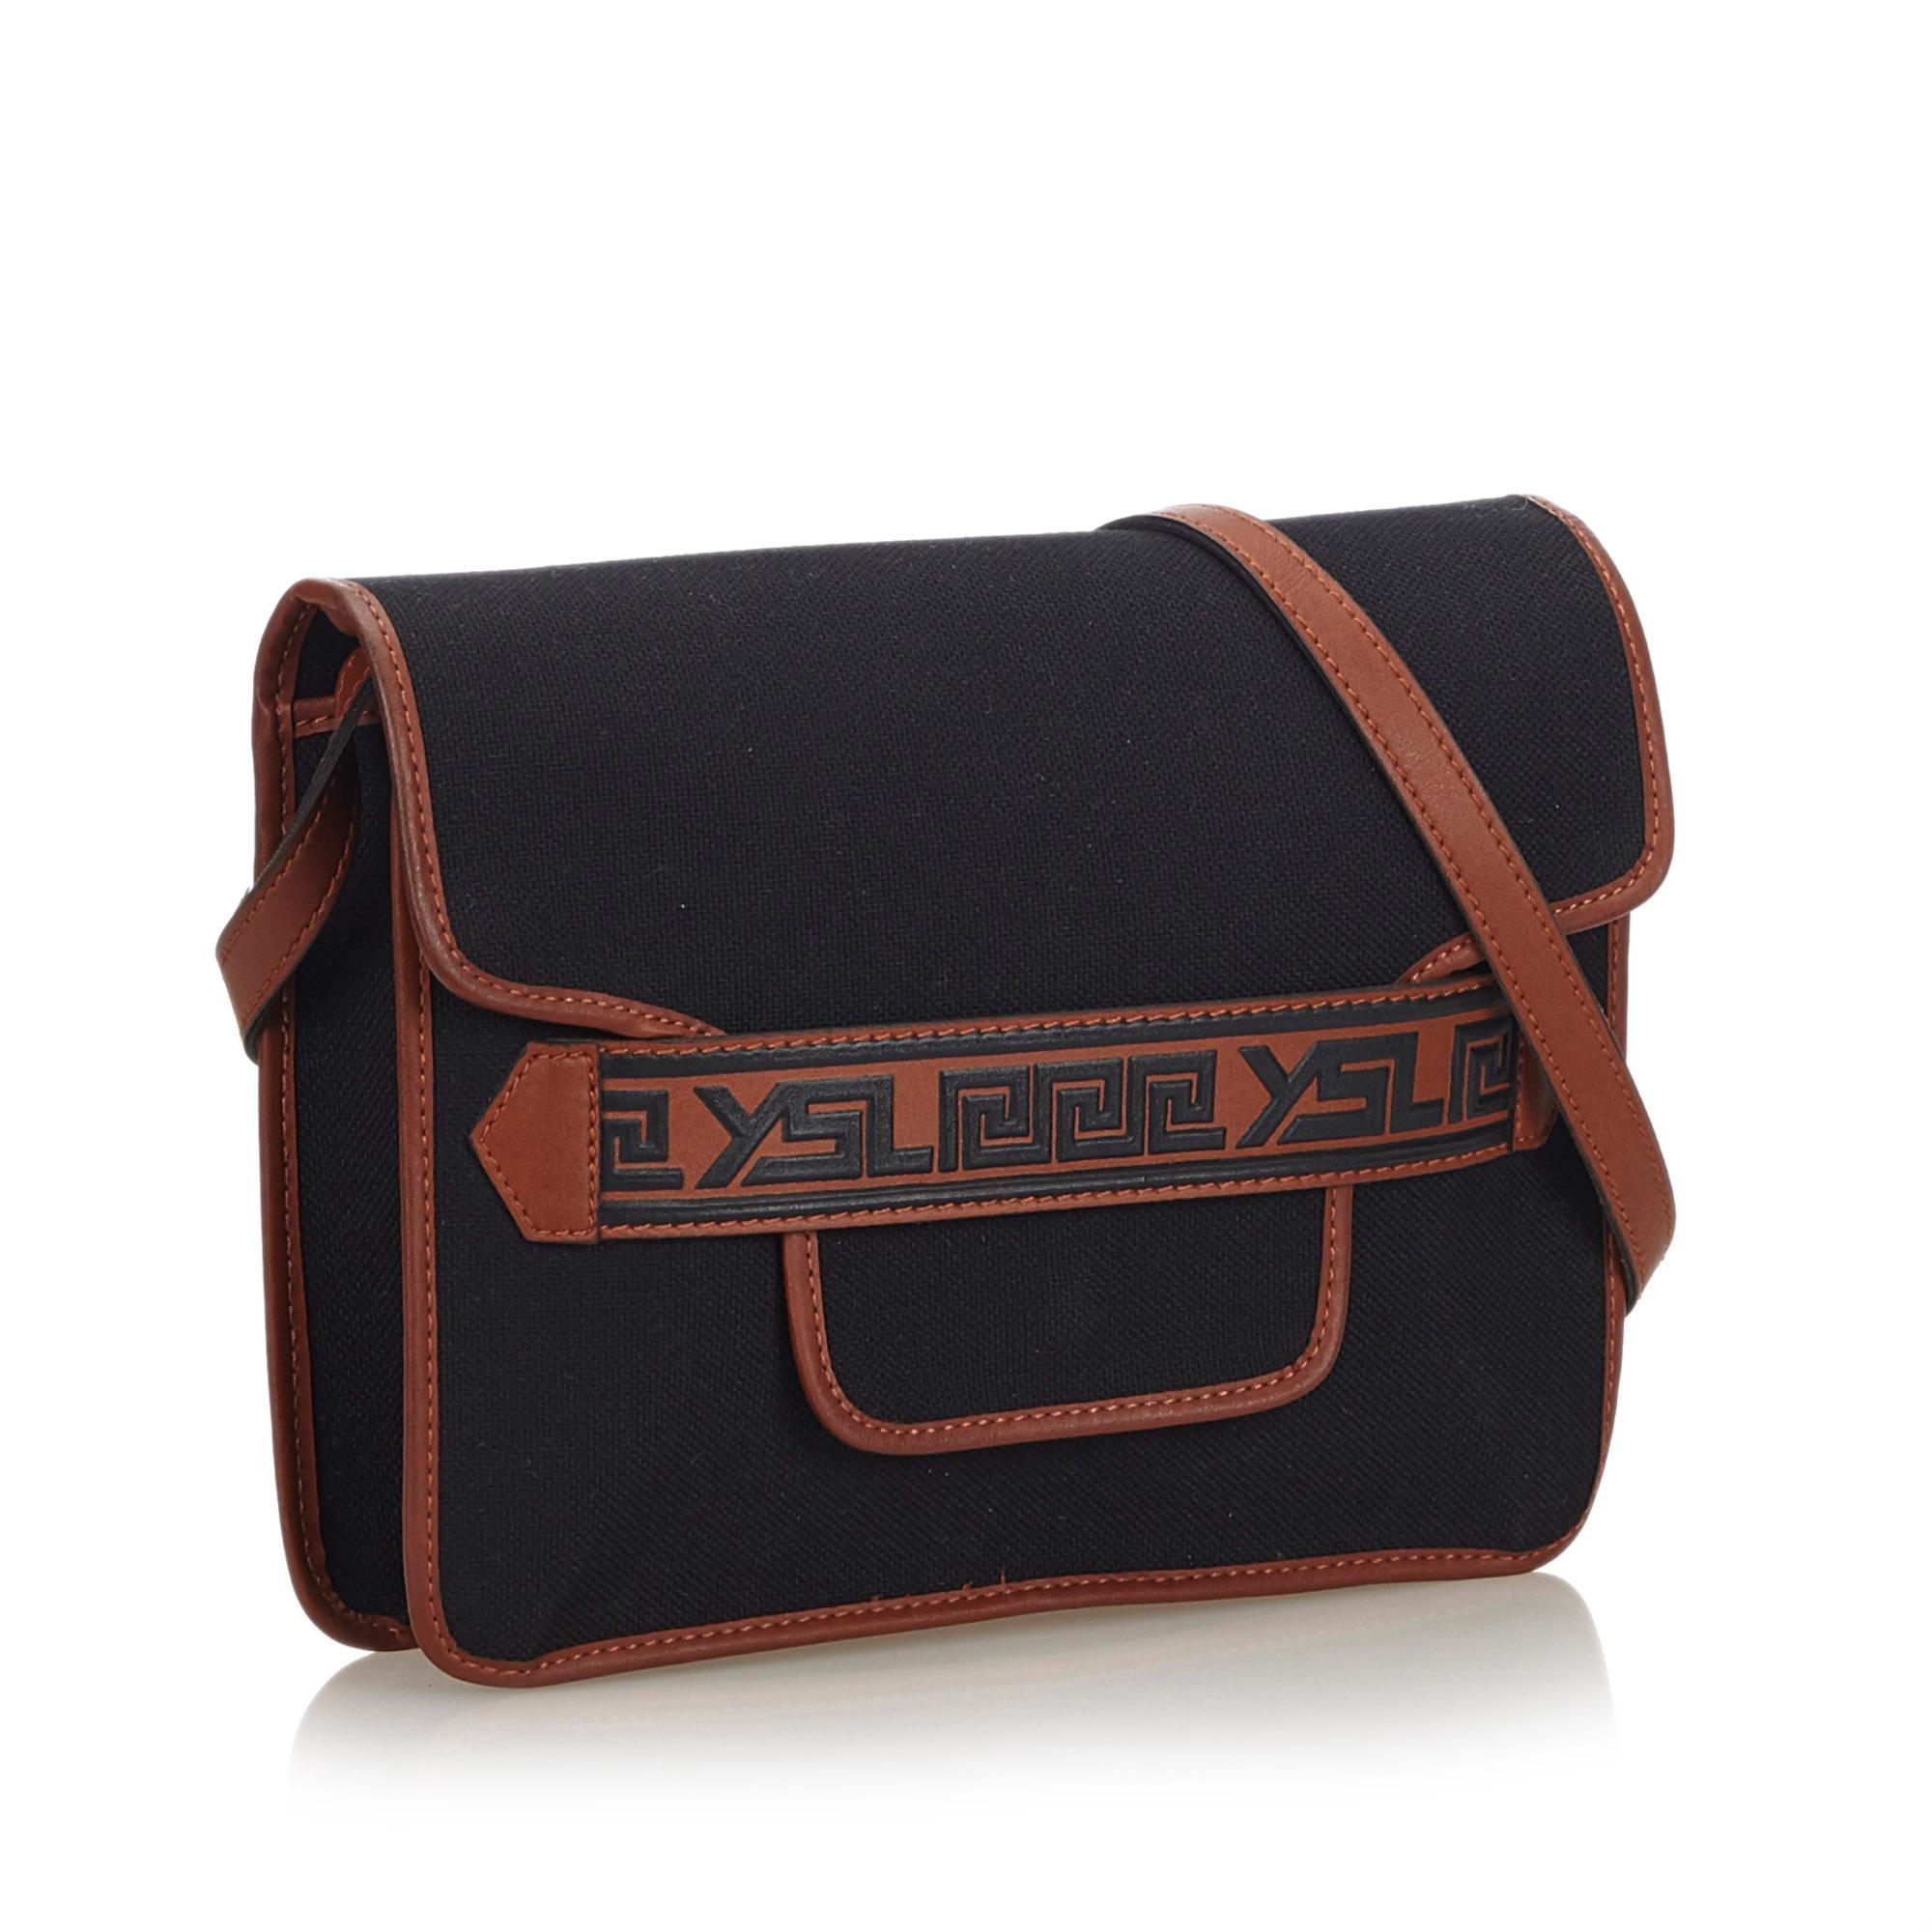 This crossbody bag features a canvas body with leather trim, a front flap with magnetic closure, and interior zip and slip pockets. It carries as AB condition rating.

Inclusions: 
This item does not come with inclusions.

Dimensions:
Length: 22.00